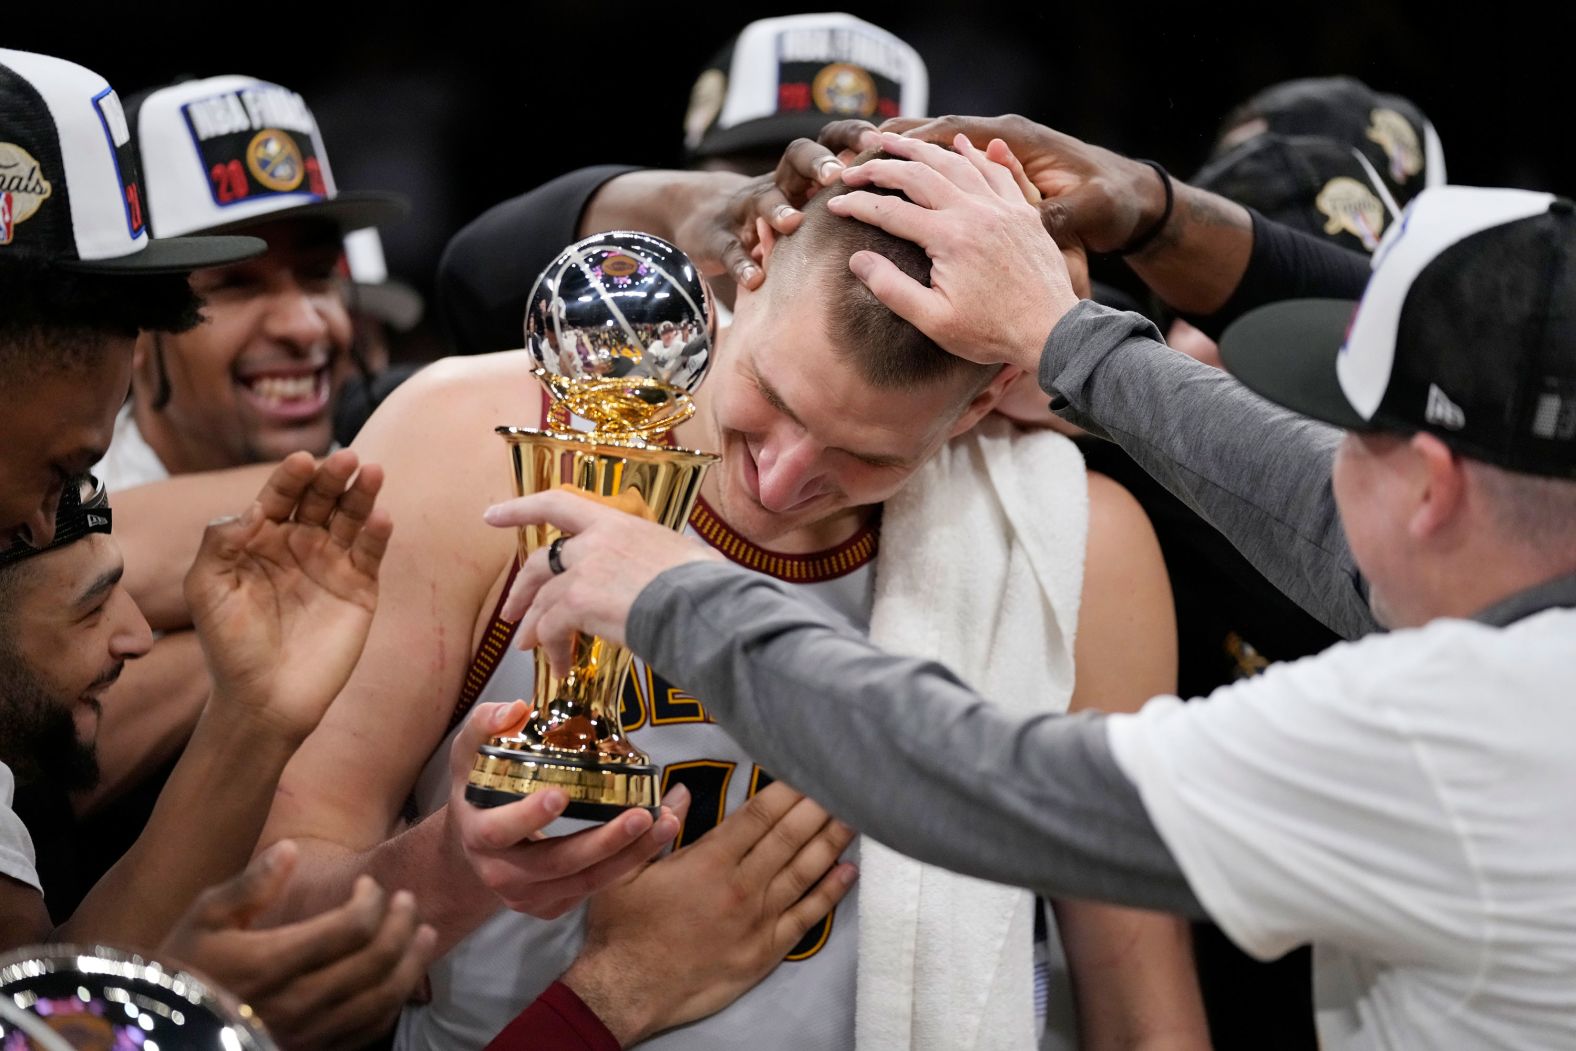 Denver Nuggets center Nikola Jokić is mobbed by teammates Monday, May 22, after winning the MVP trophy for the NBA's Western Conference finals. The Nuggets swept the Los Angeles Lakers <a href="index.php?page=&url=https%3A%2F%2Fwww.cnn.com%2F2023%2F05%2F23%2Fus%2Fnuggets-beat-lakers-advance-to-nba-finals%2Findex.html" target="_blank">to advance to the first NBA Finals in franchise history</a>.